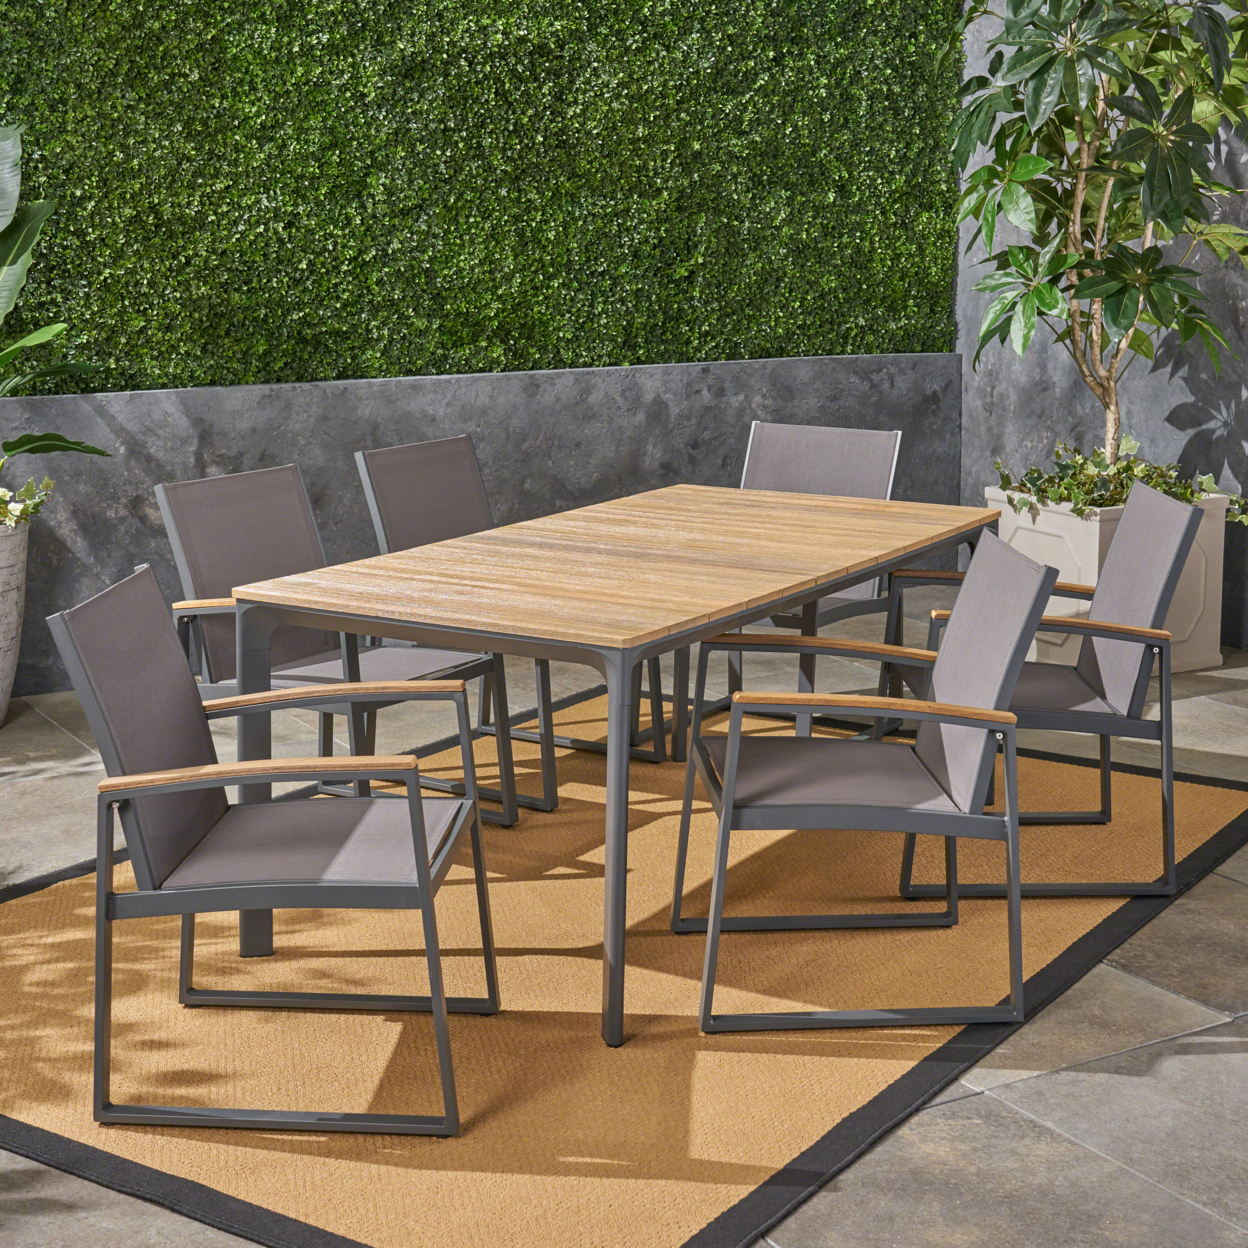 Buster Outdoor 7 Piece Aluminum And Mesh Dining Set With Wood Top - Wicker